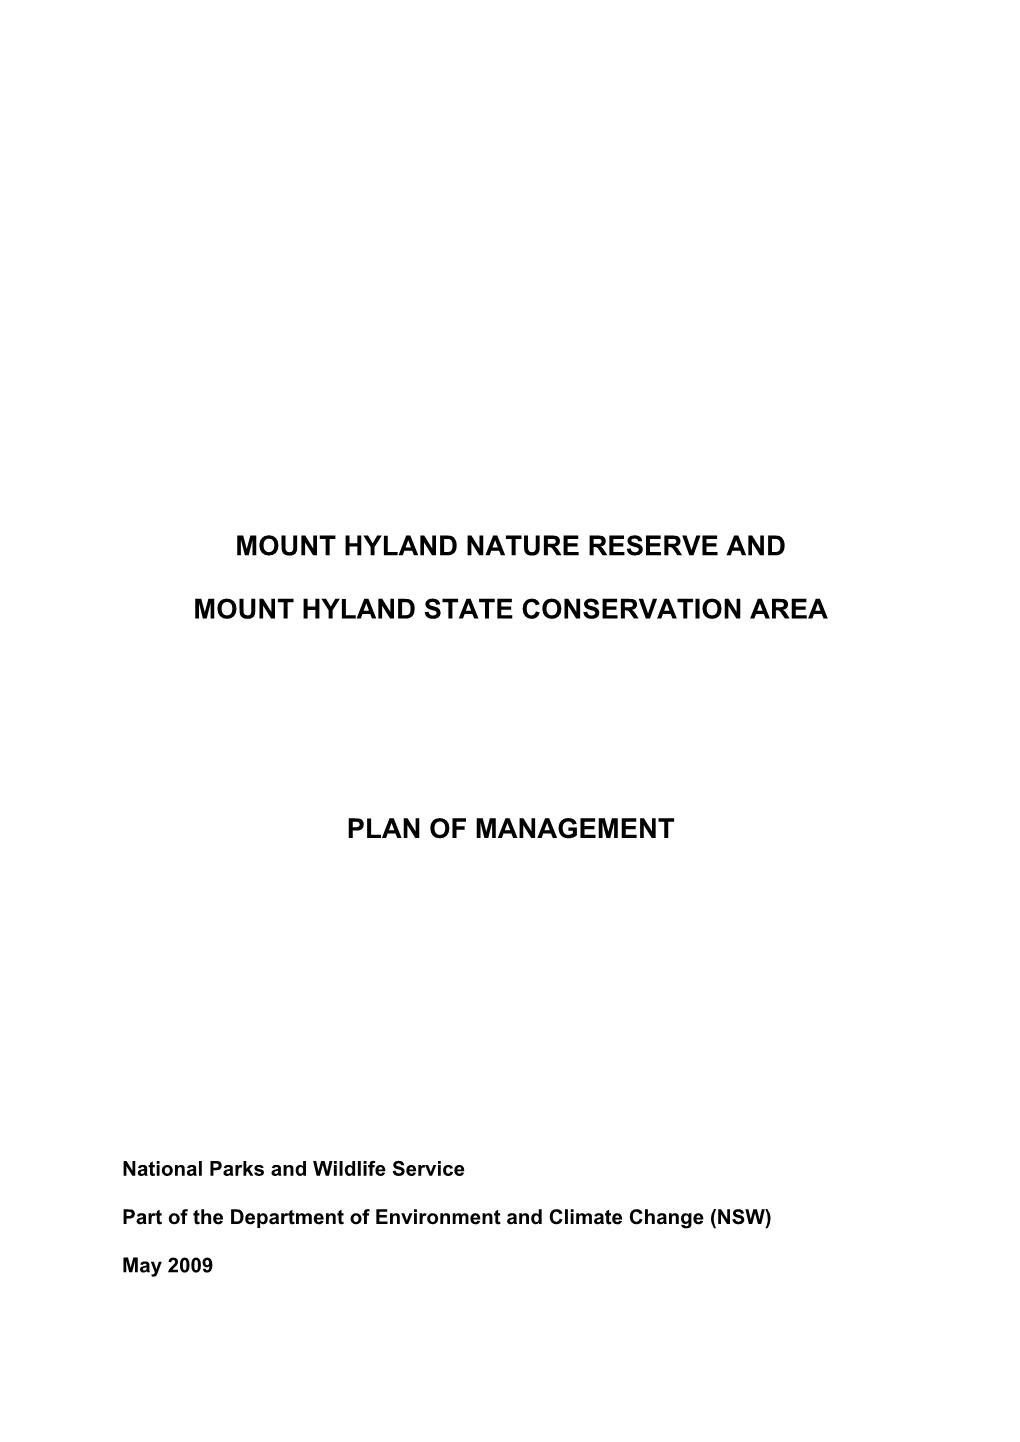 Mount Hyland Nature Reserve and Mount Hyland State Conservation